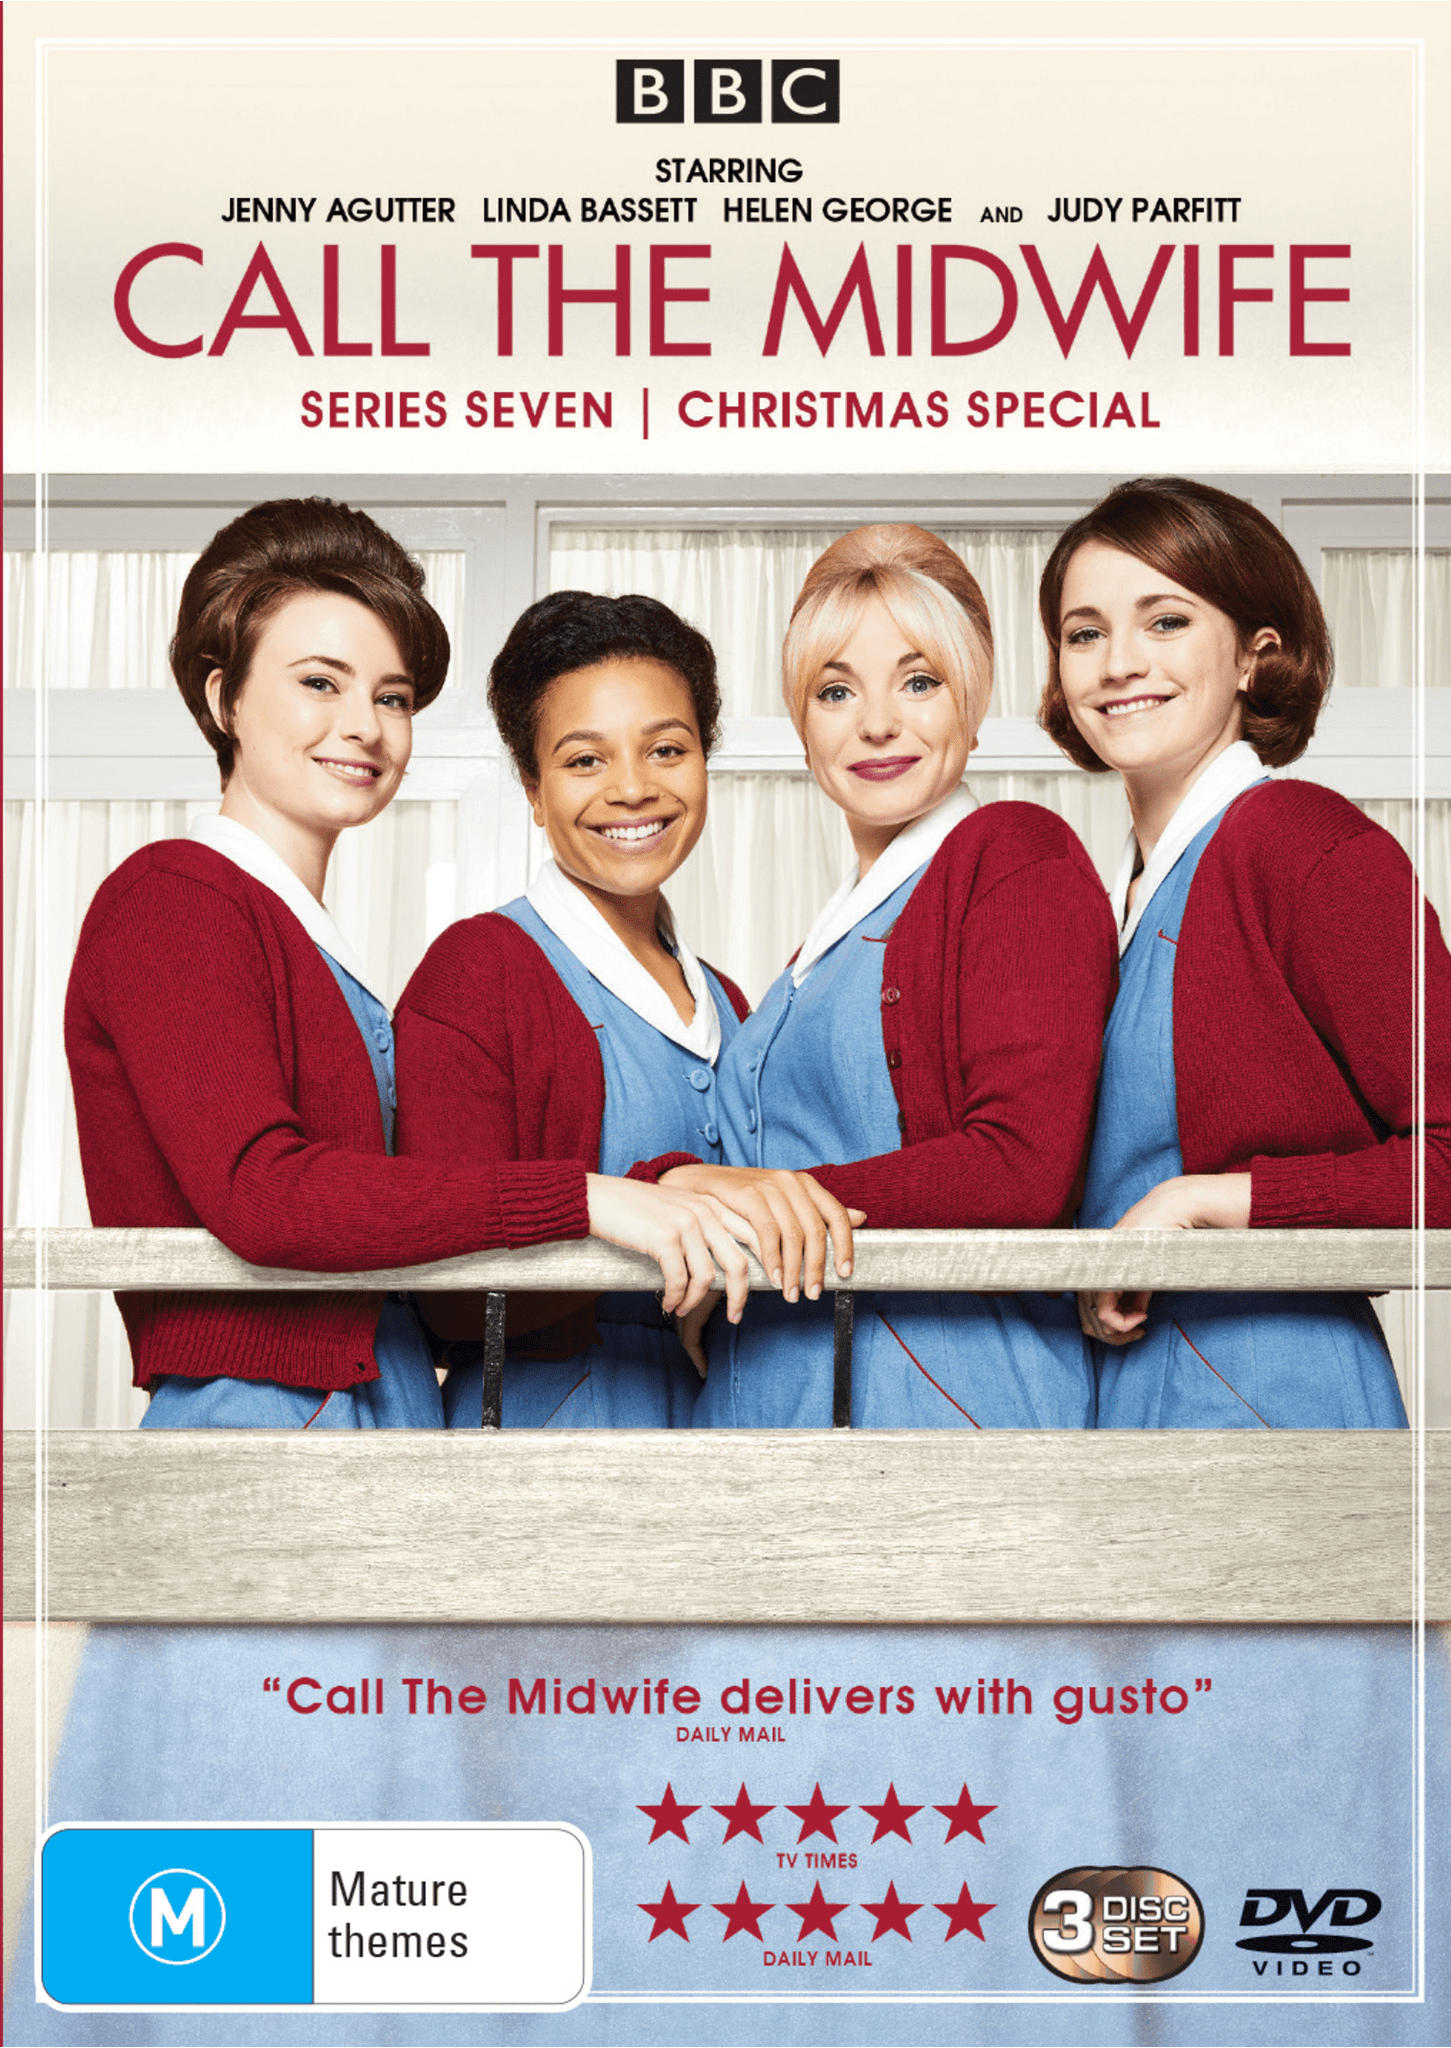 CALL THE MIDWIFE: SERIES 7